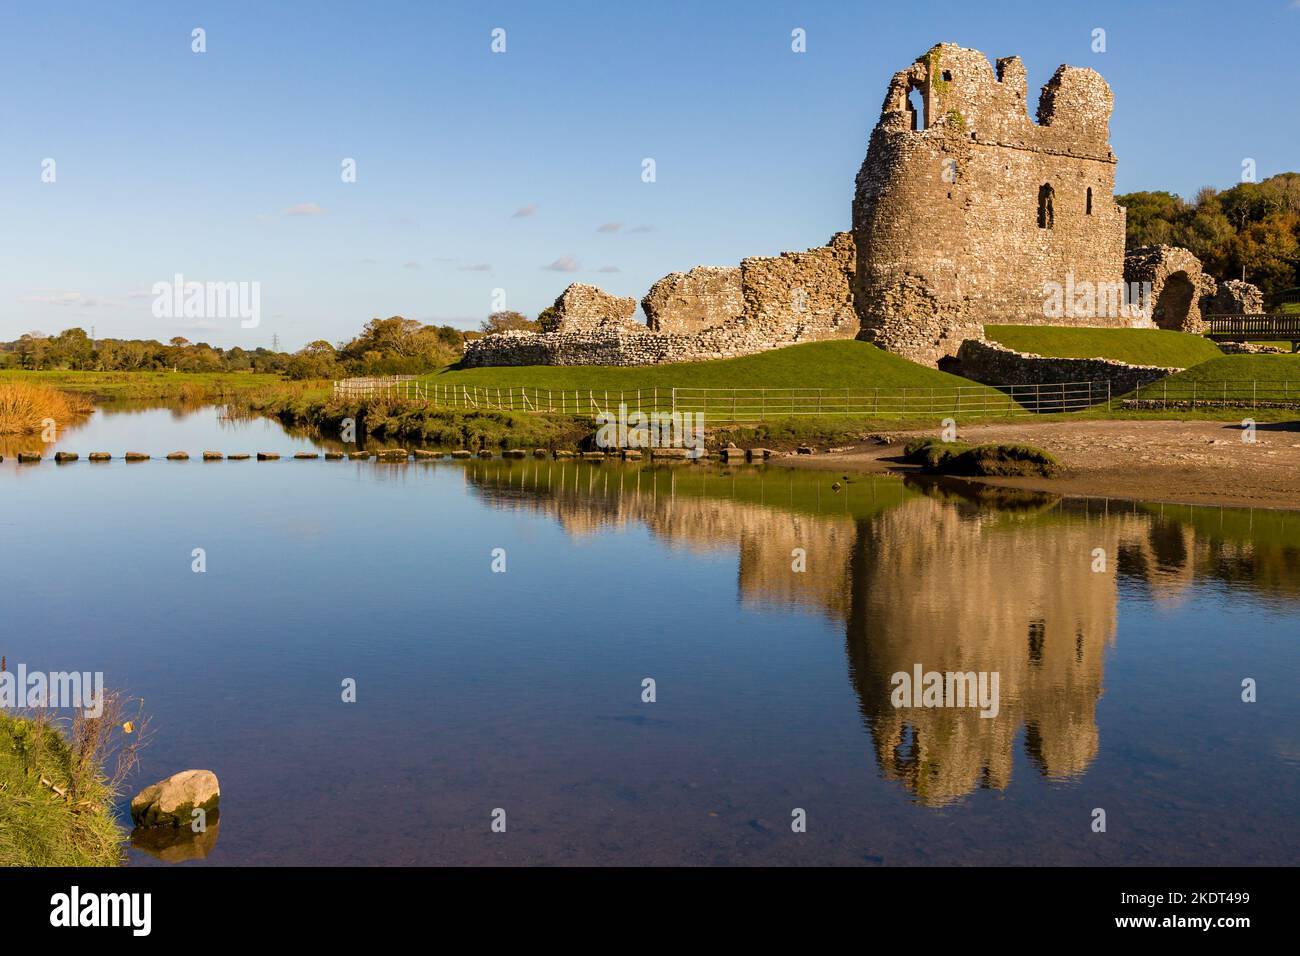 Ruins of a 12th century Welsh castle in the rural countryside (Ogmore Castle, Vale of Glamorgan) Stock Photo